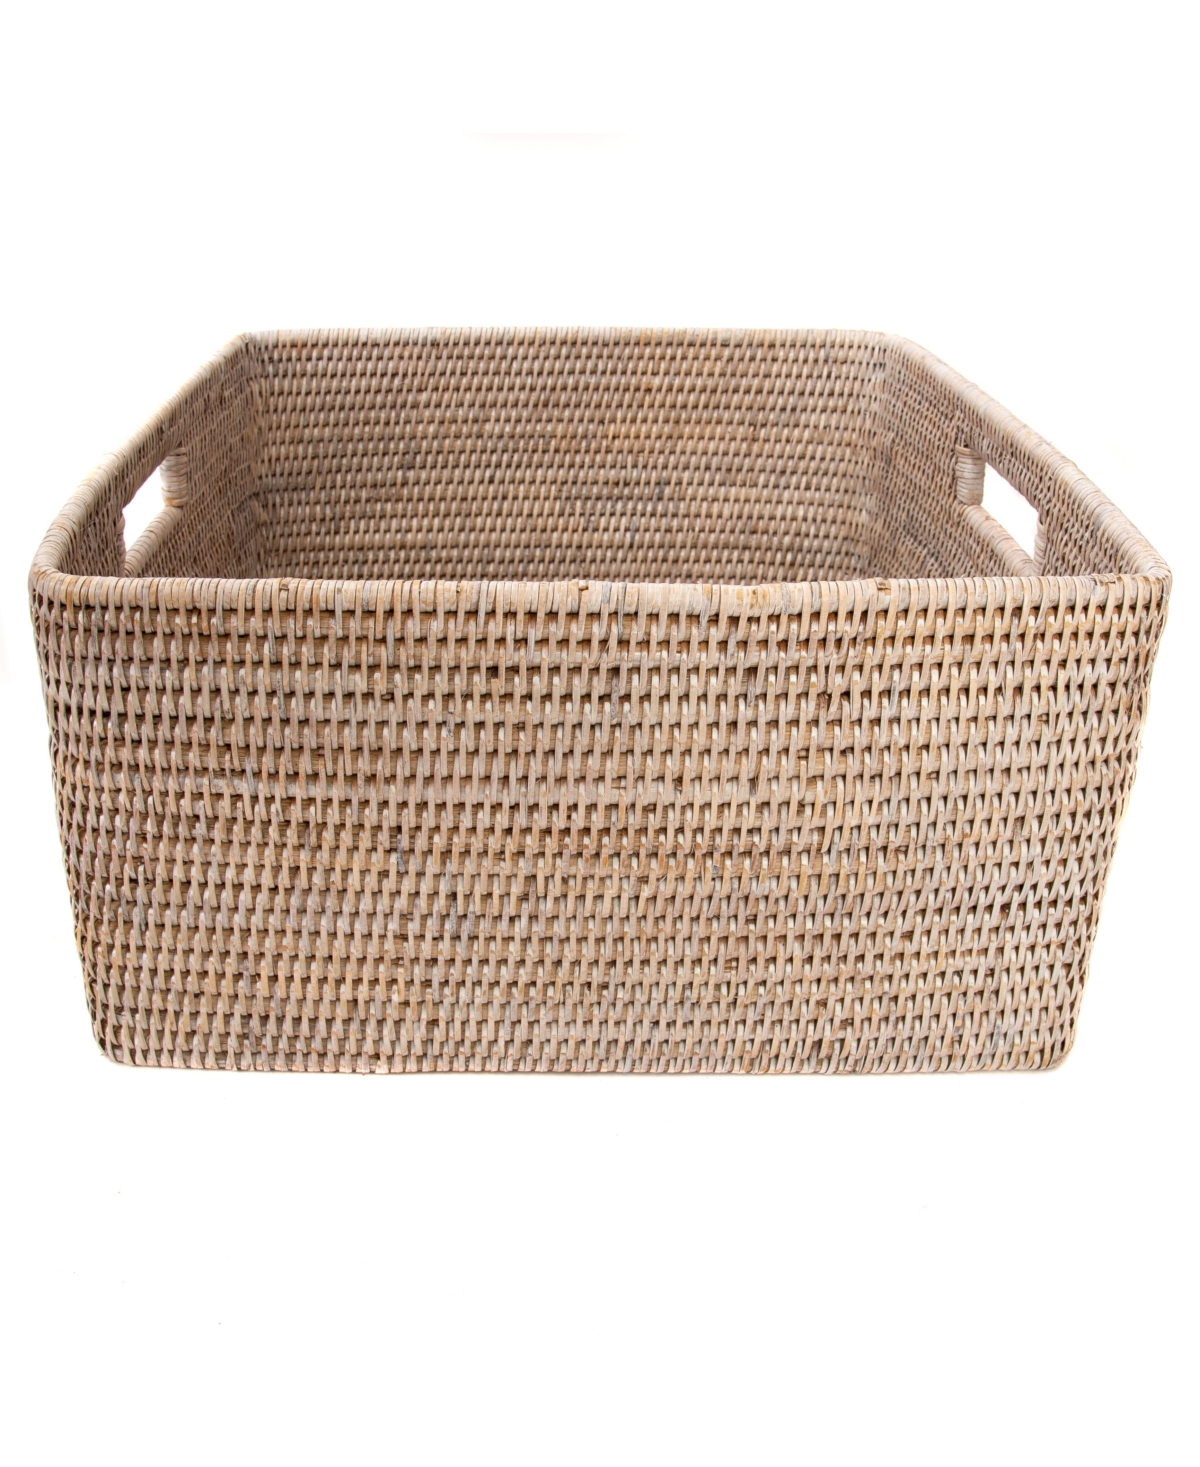 Shop Artifacts Trading Company Artifacts Rattan Square Storage Basket In Off-white